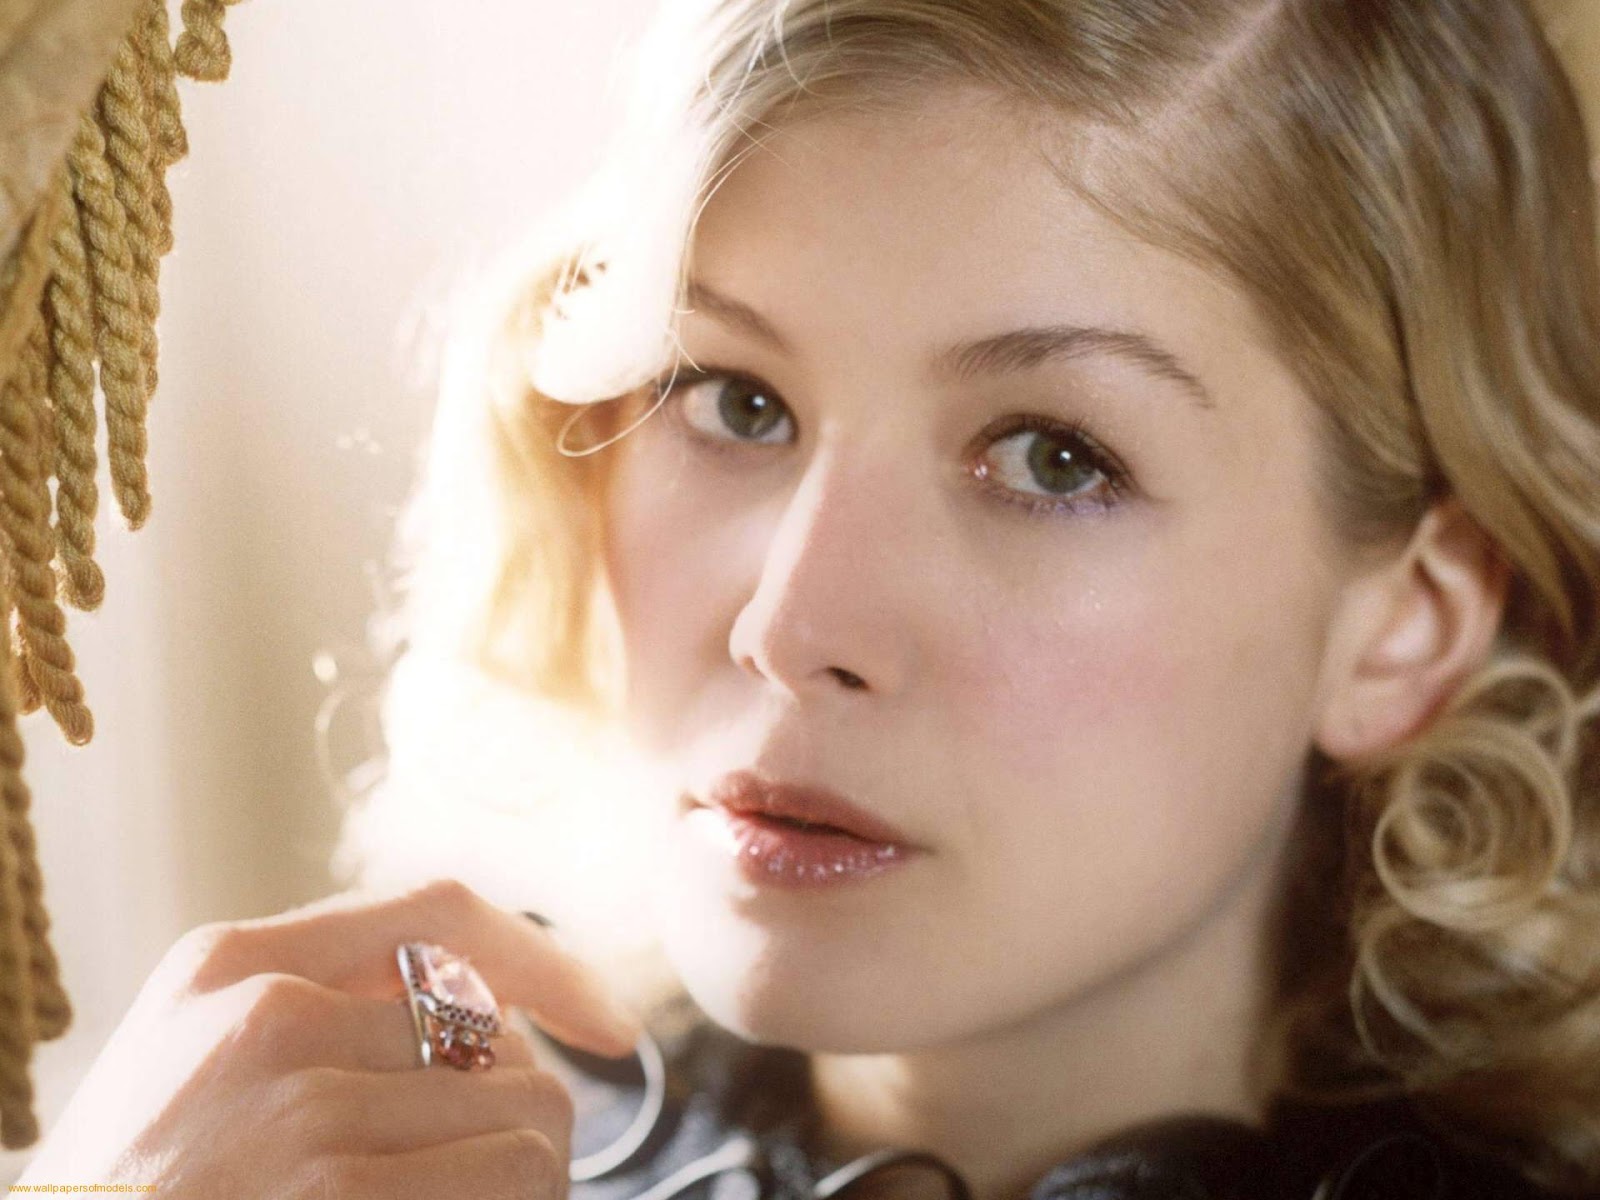 Hollywood Movie Database: Rosamund Pike Hot and Sexy Pictures1600 x 1200